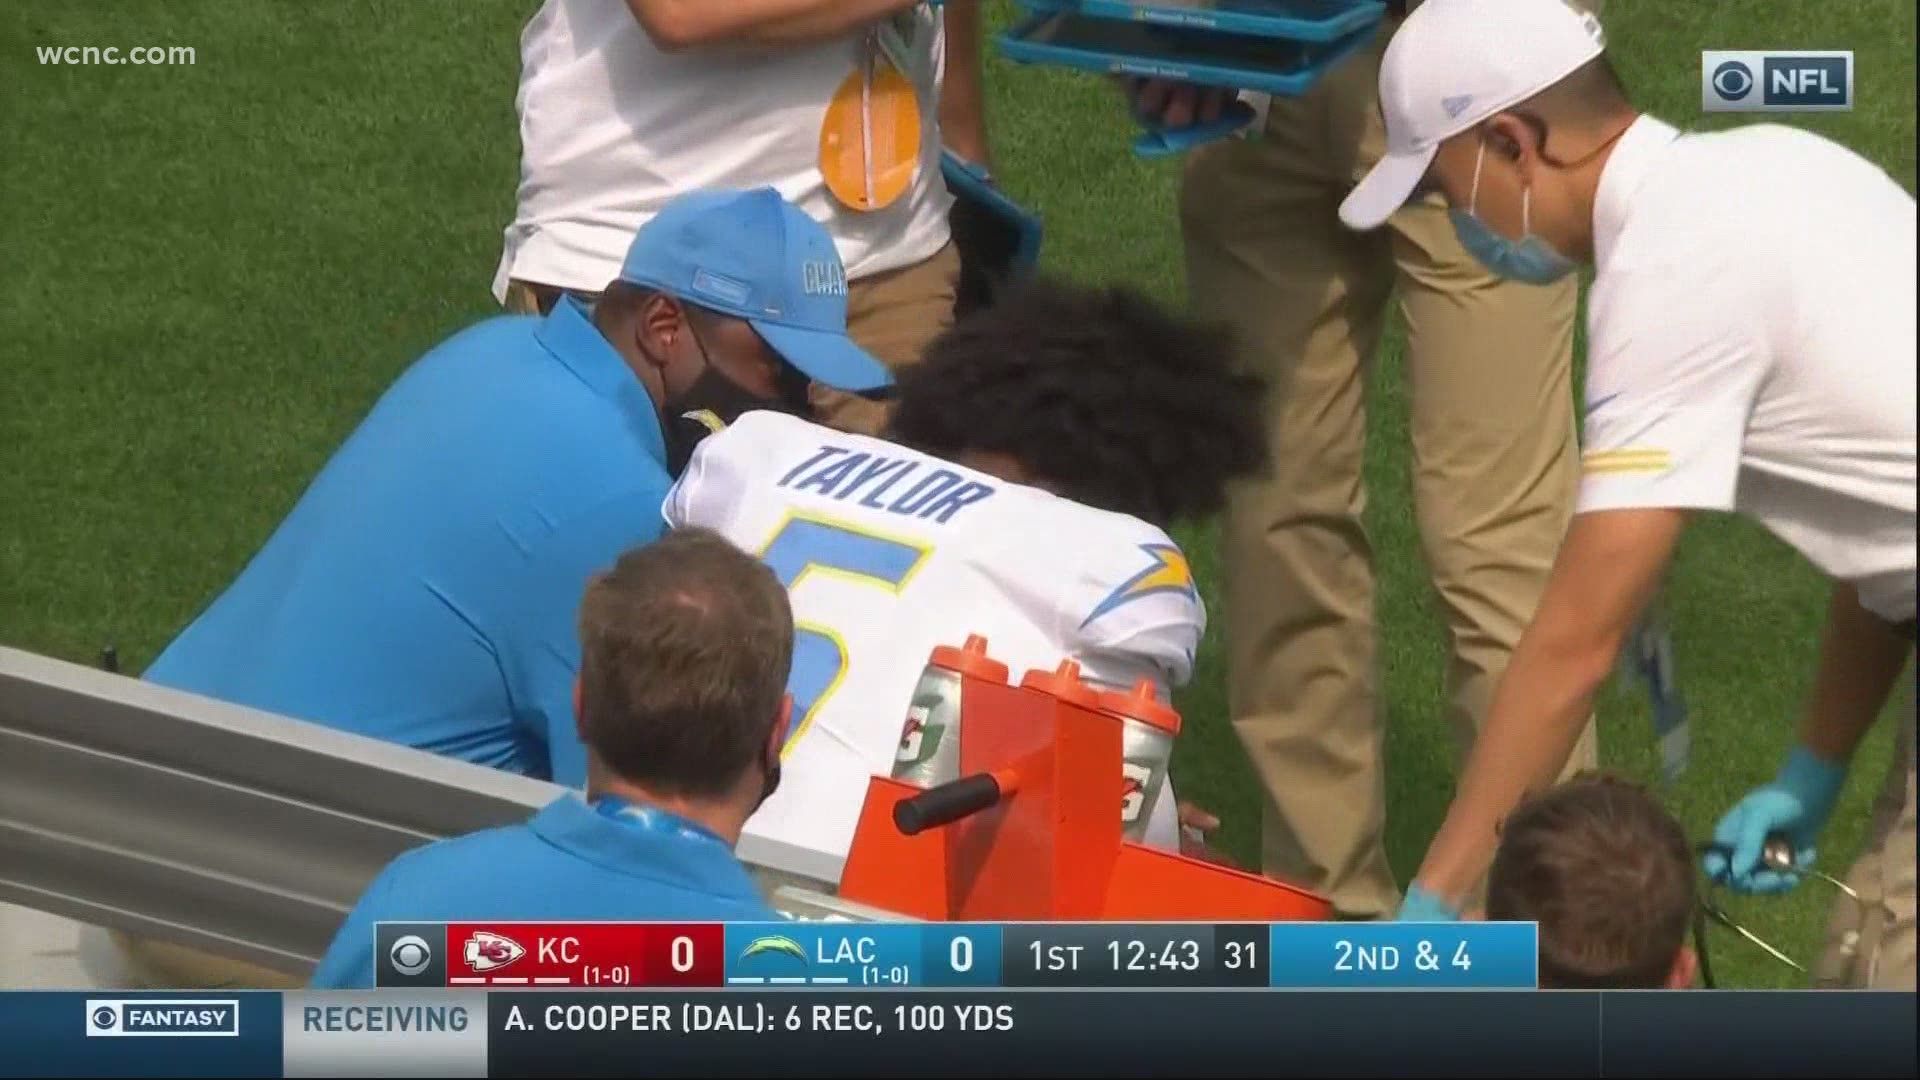 Chargers QB was unable to finish playing in last Sunday's game after chest pain.